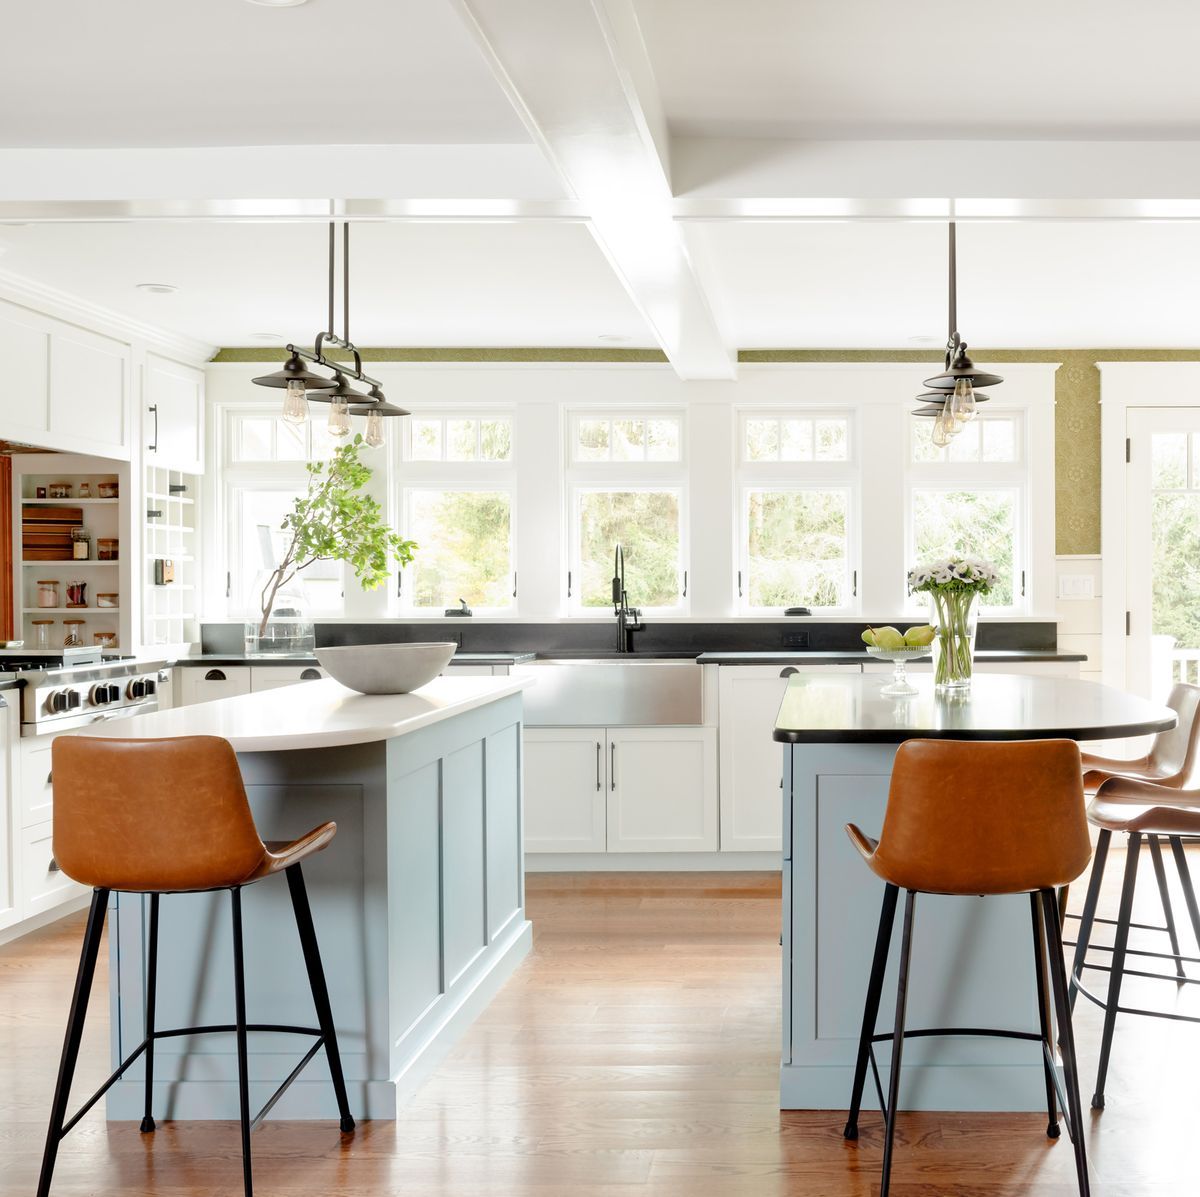 10 double island kitchens from designers